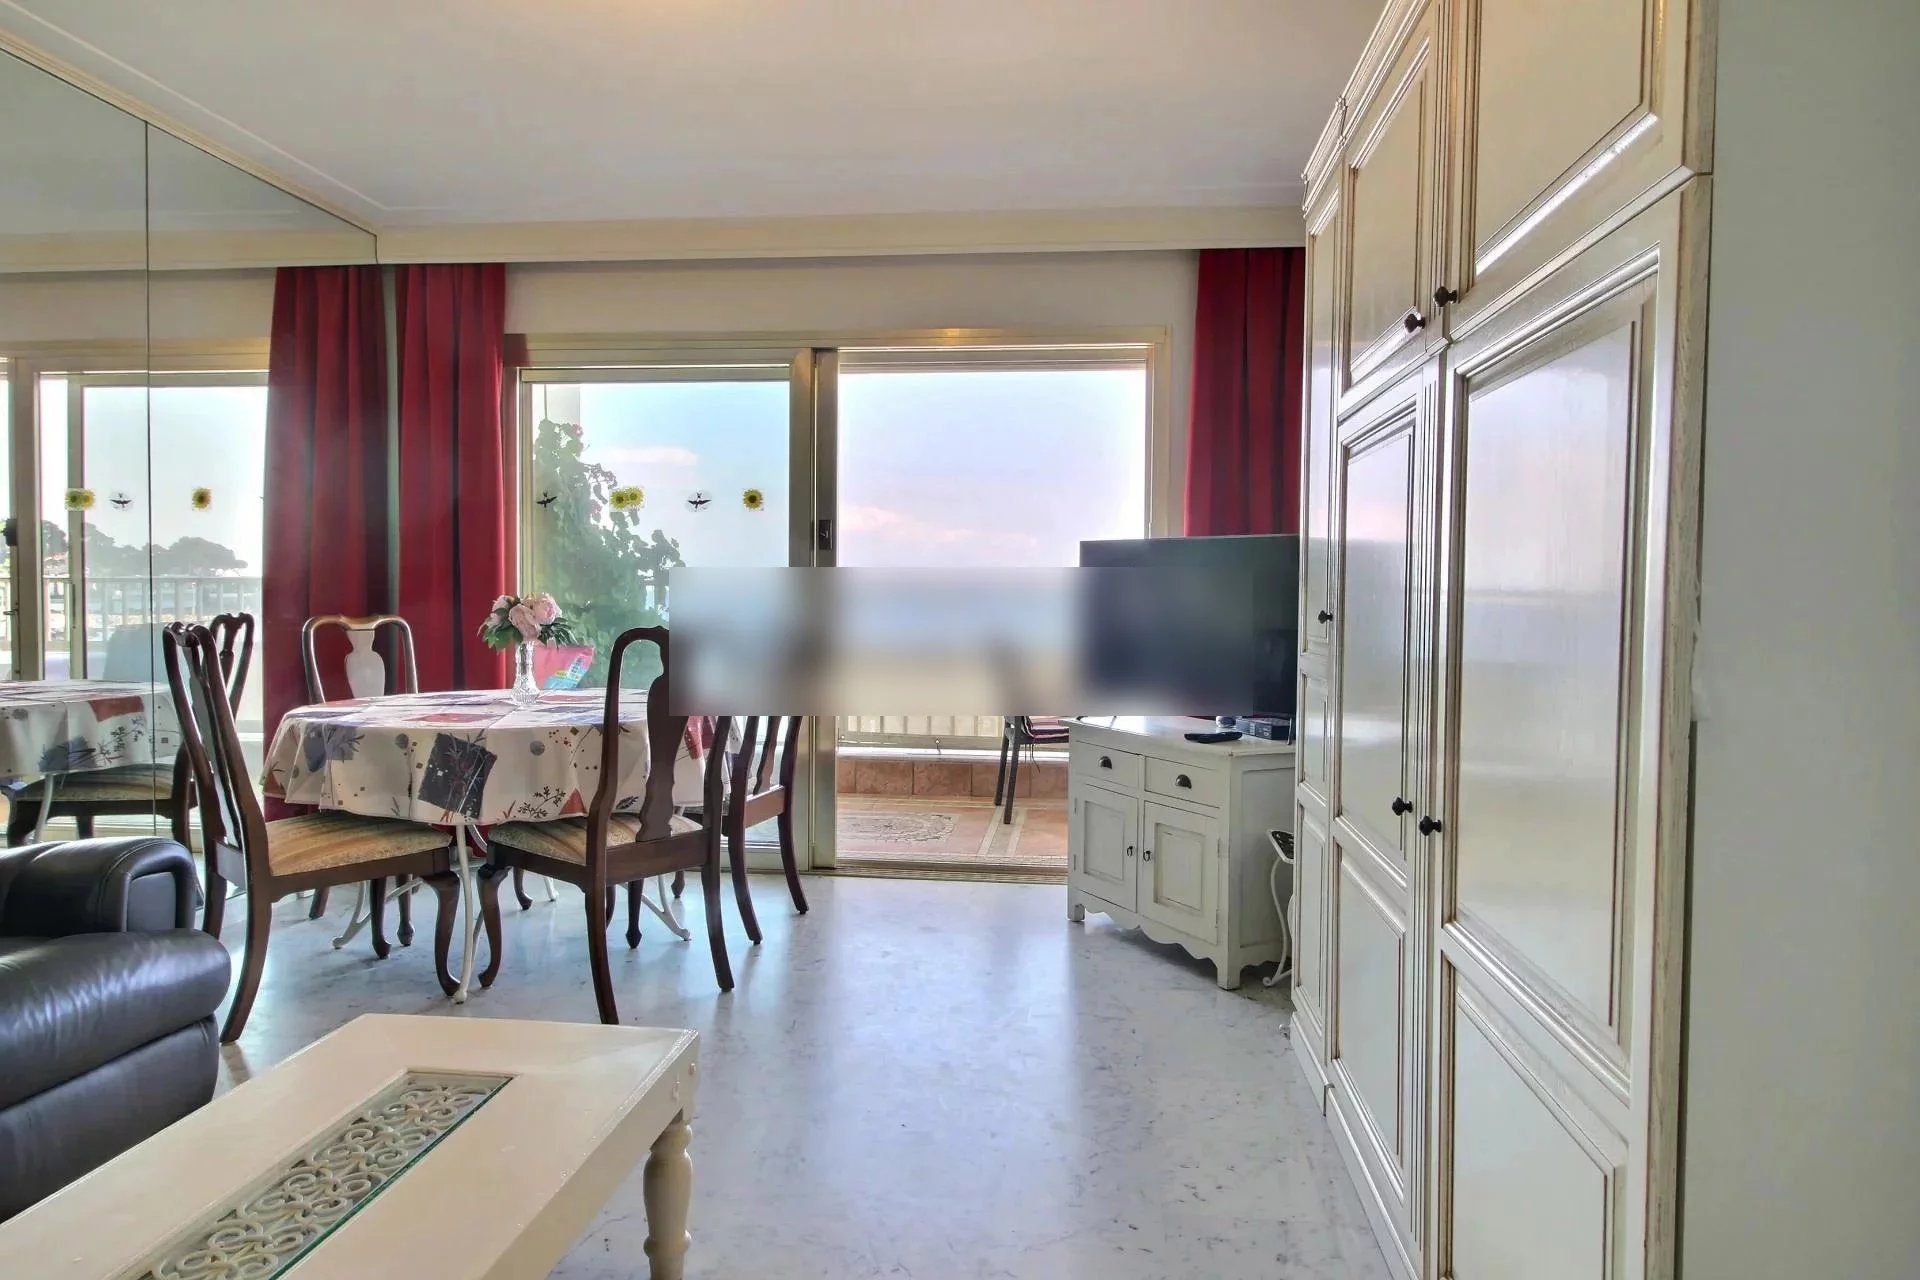 One bedroom apartment with sea view – Antibes